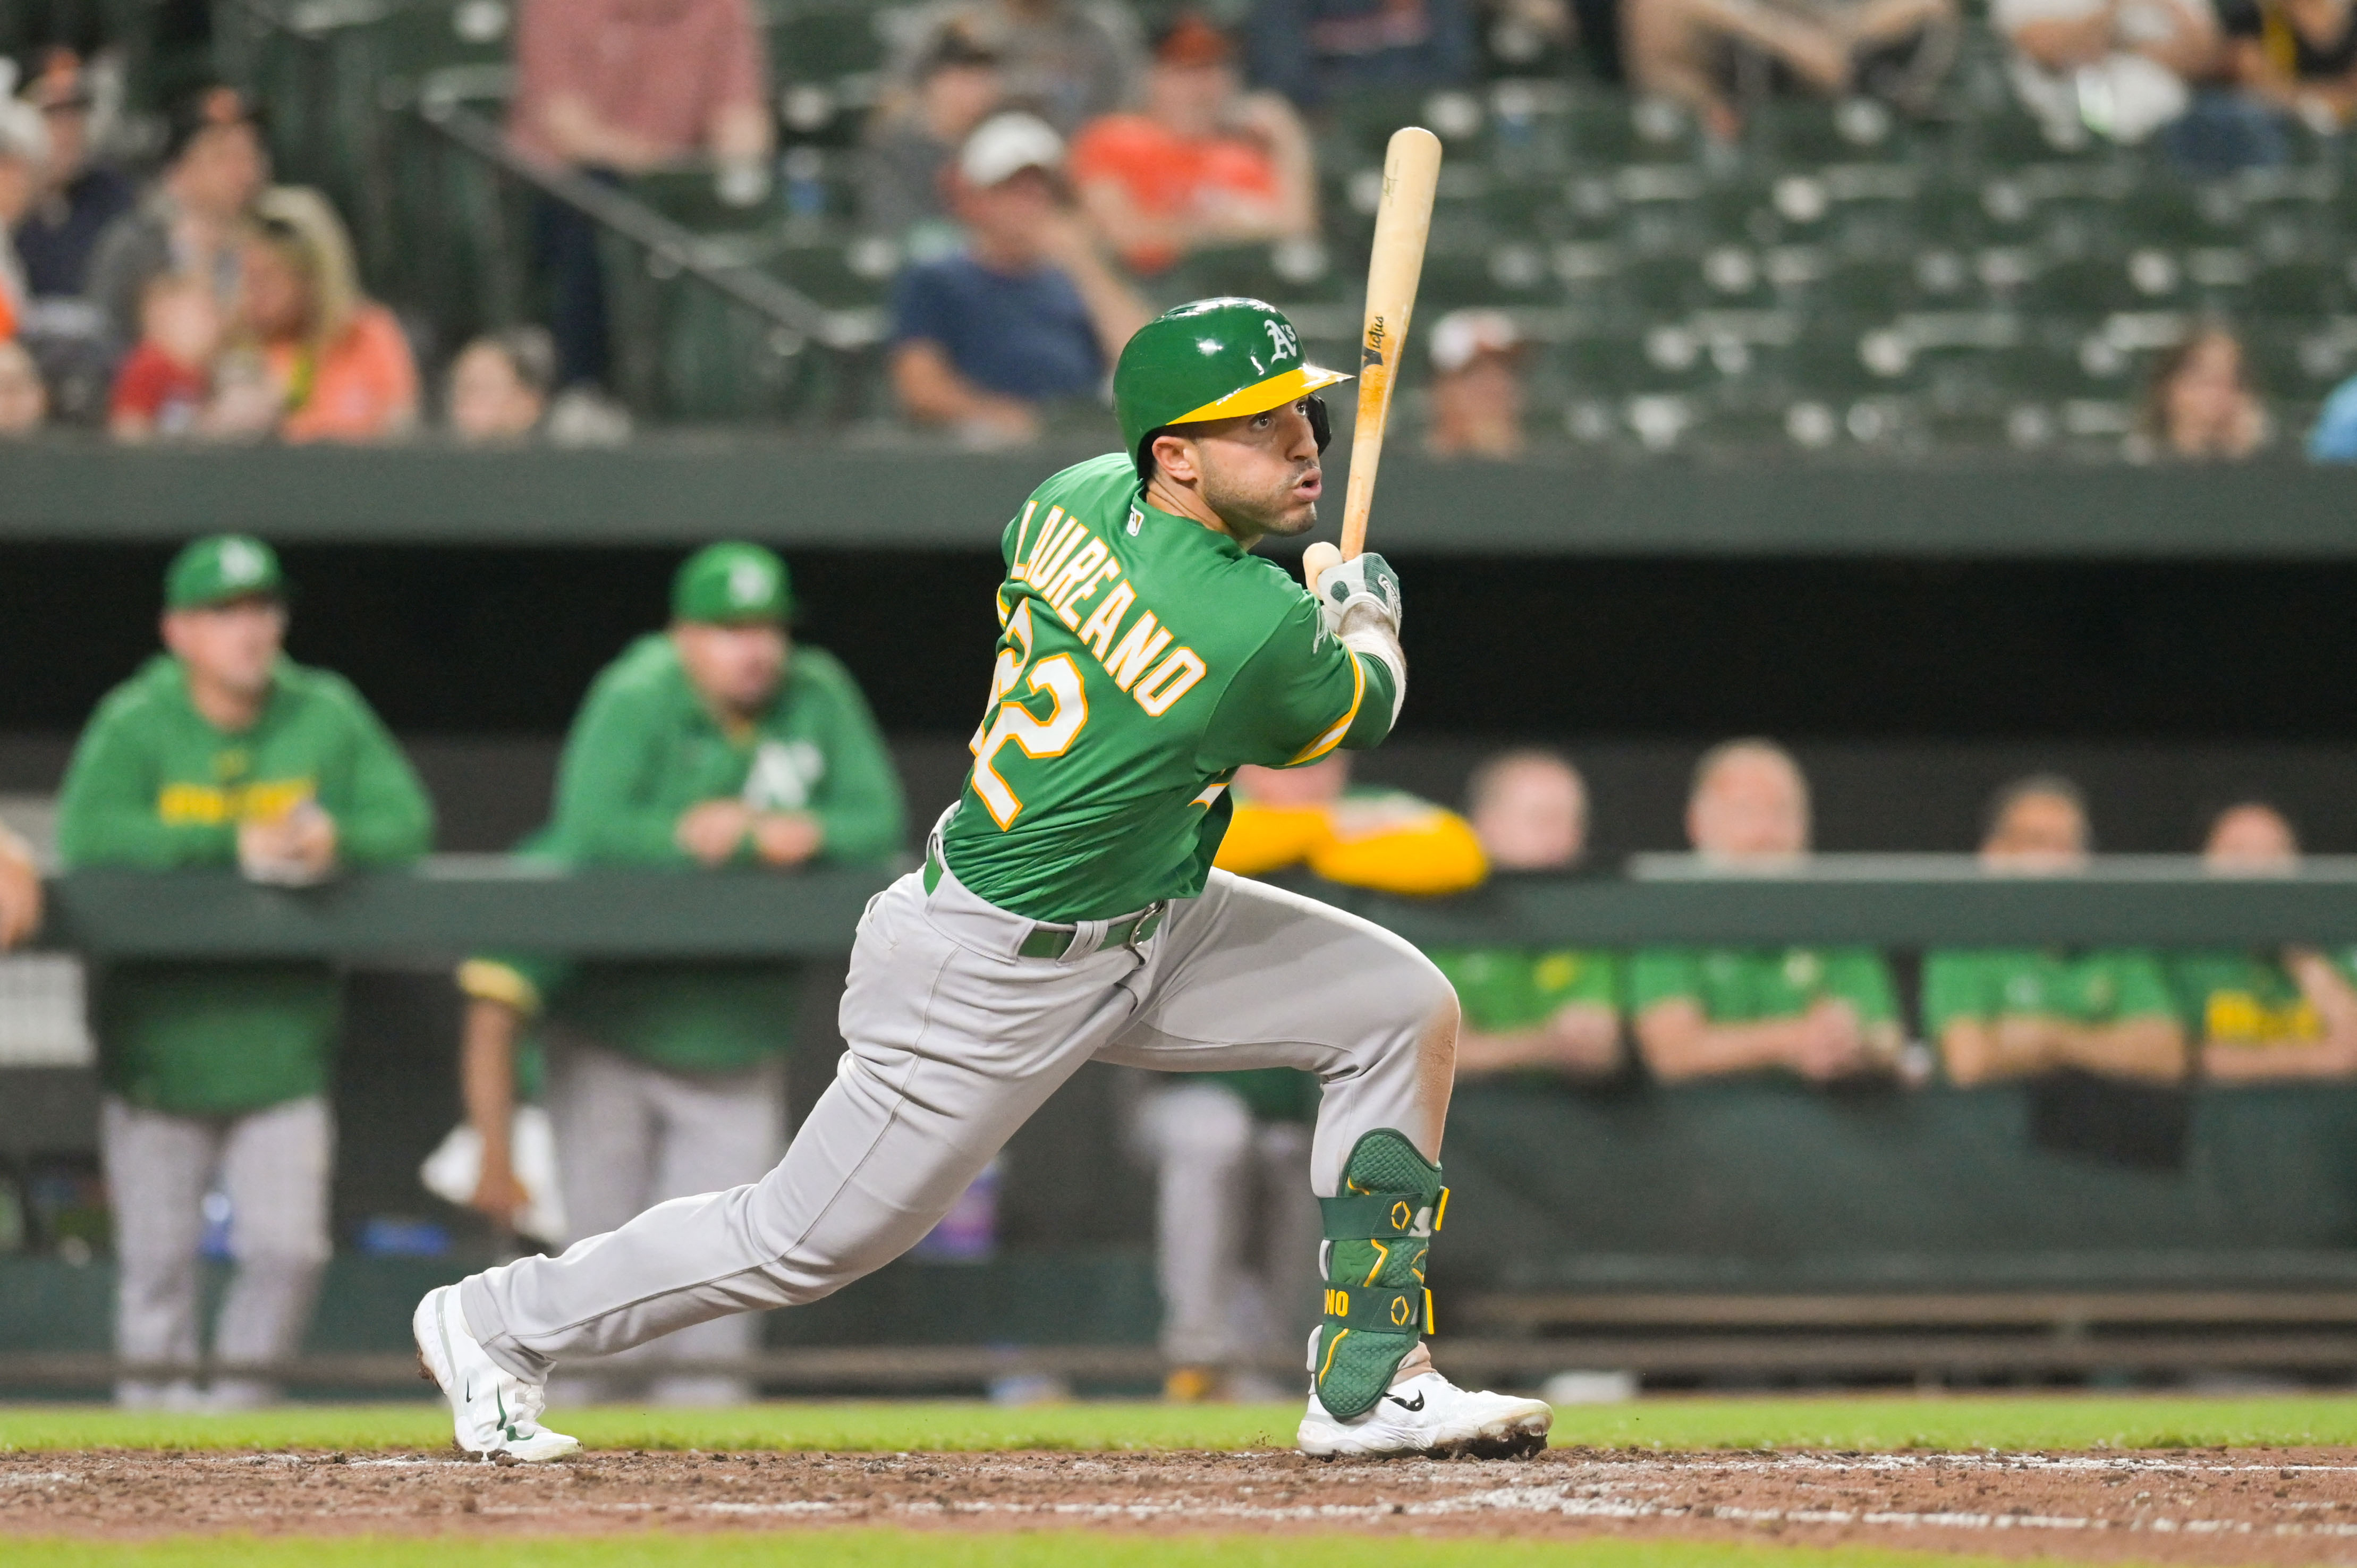 A's take down Orioles, snap 6-game skid